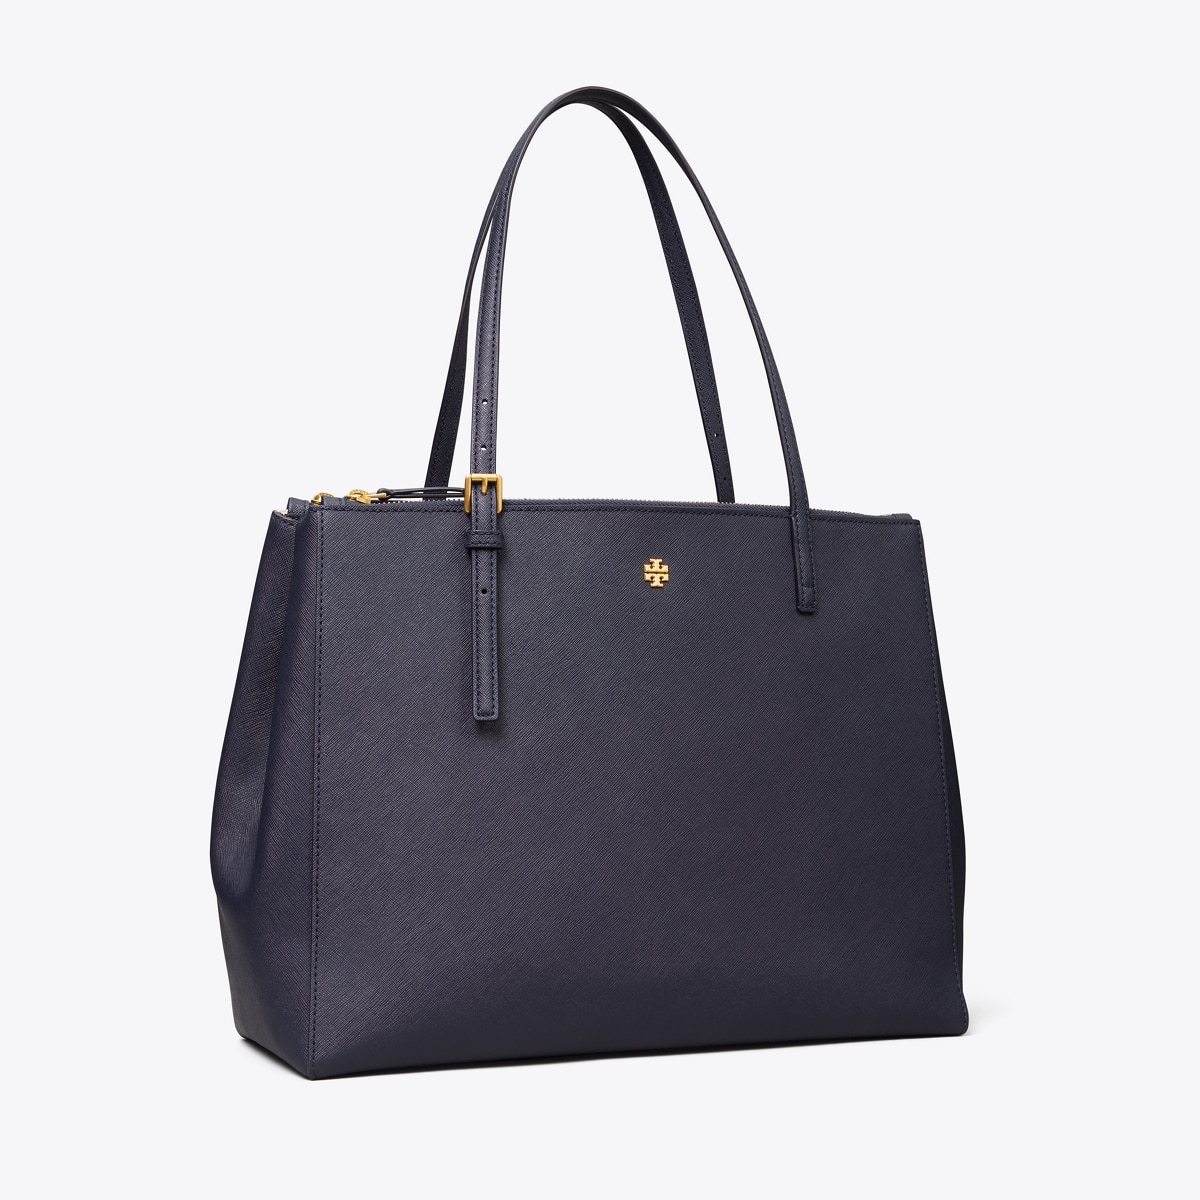 Emerson Large Double Zip Tote: Women's Designer Tote Bags | Tory Burch